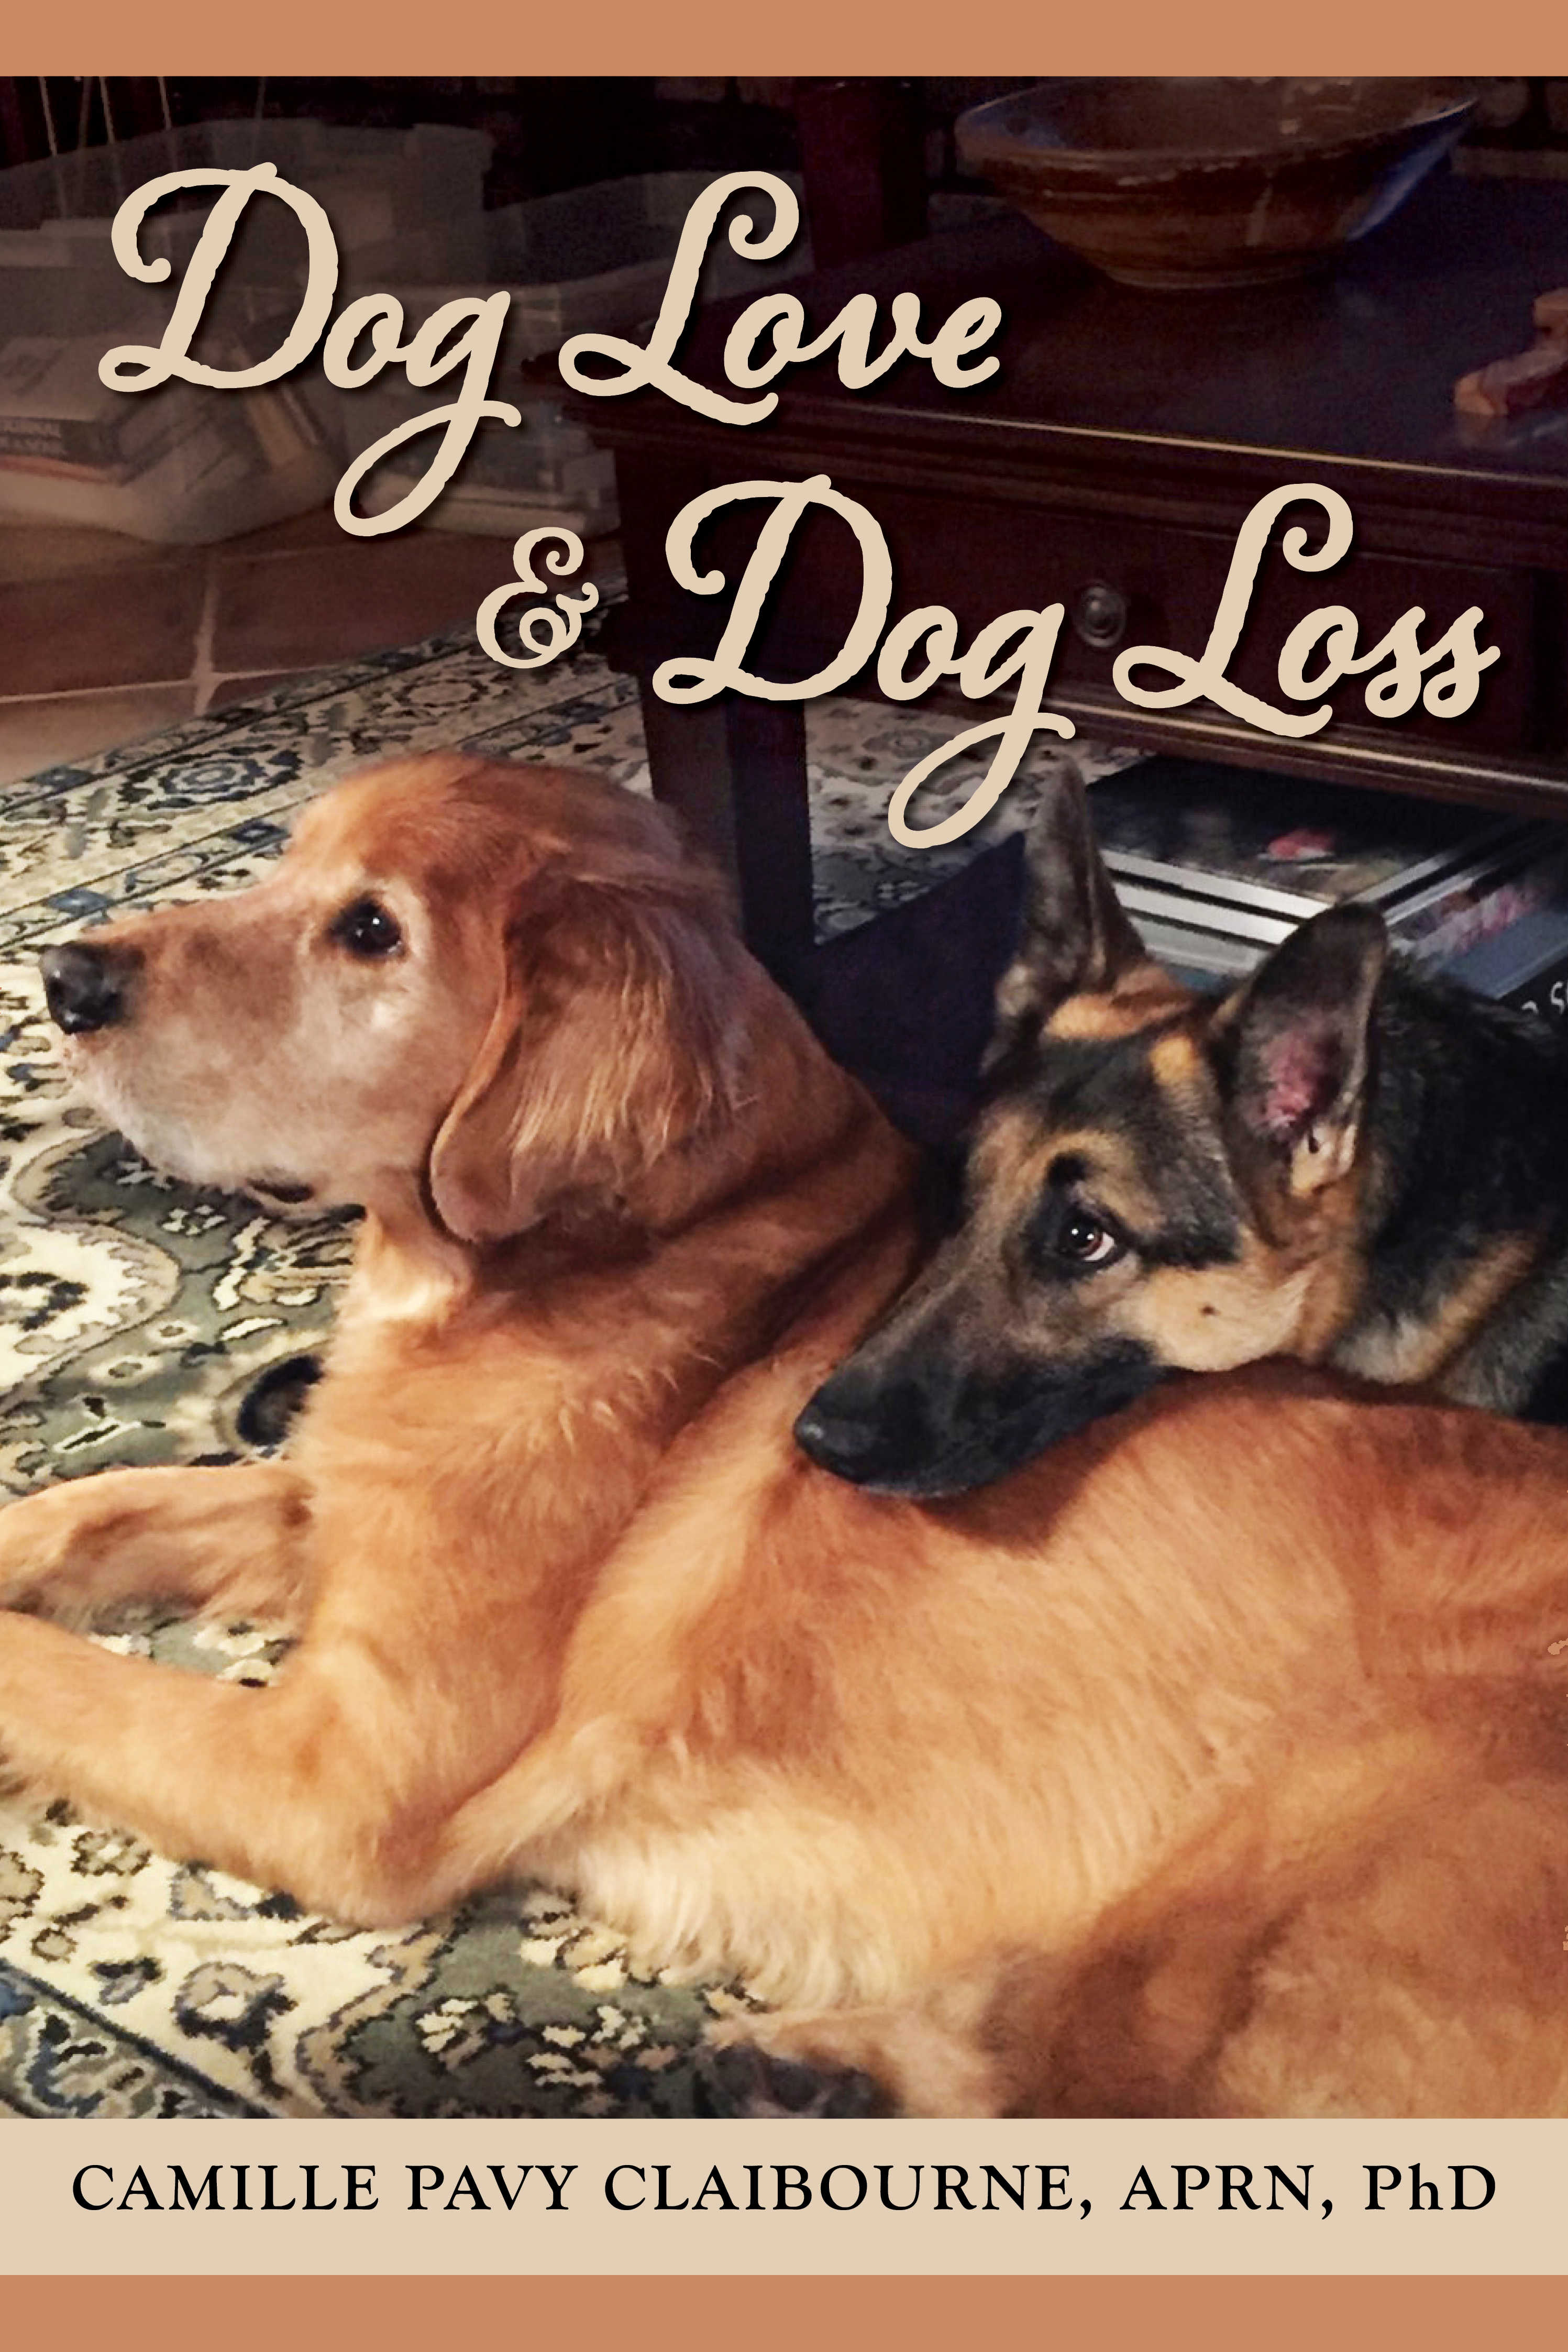 Dog Love and Dog Loss by Camille Pavy Claibourne, APRN, PhD